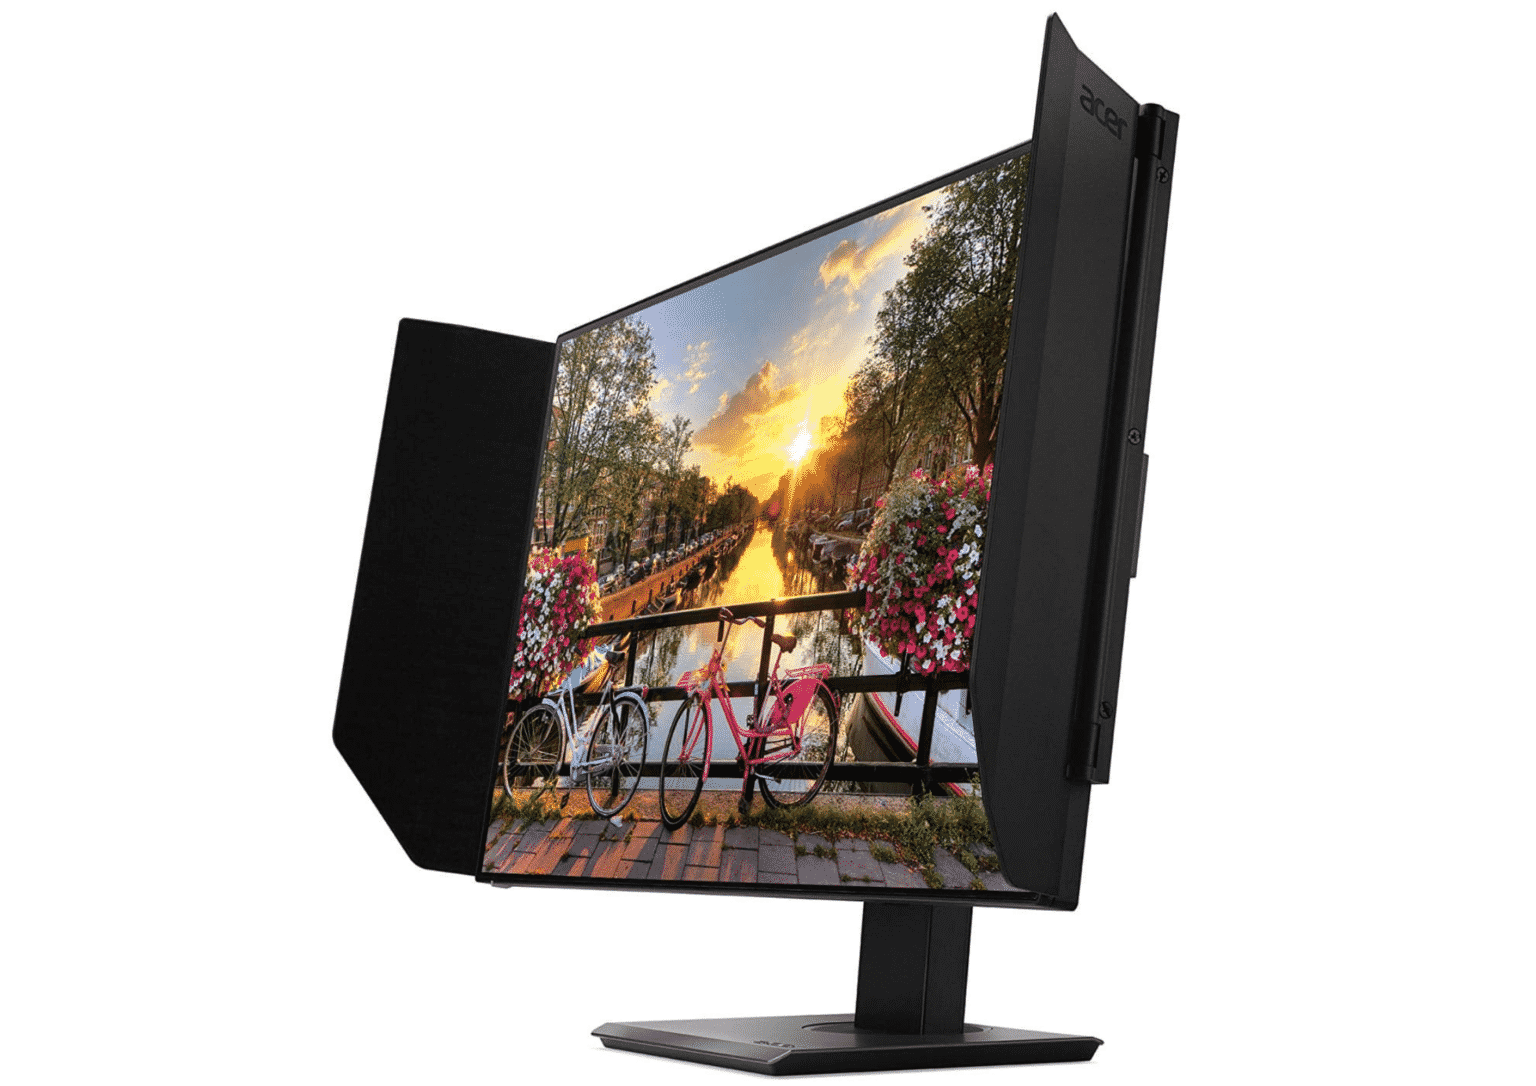 Top 15 Best Monitors for Photo Editing (July 2022 Update)